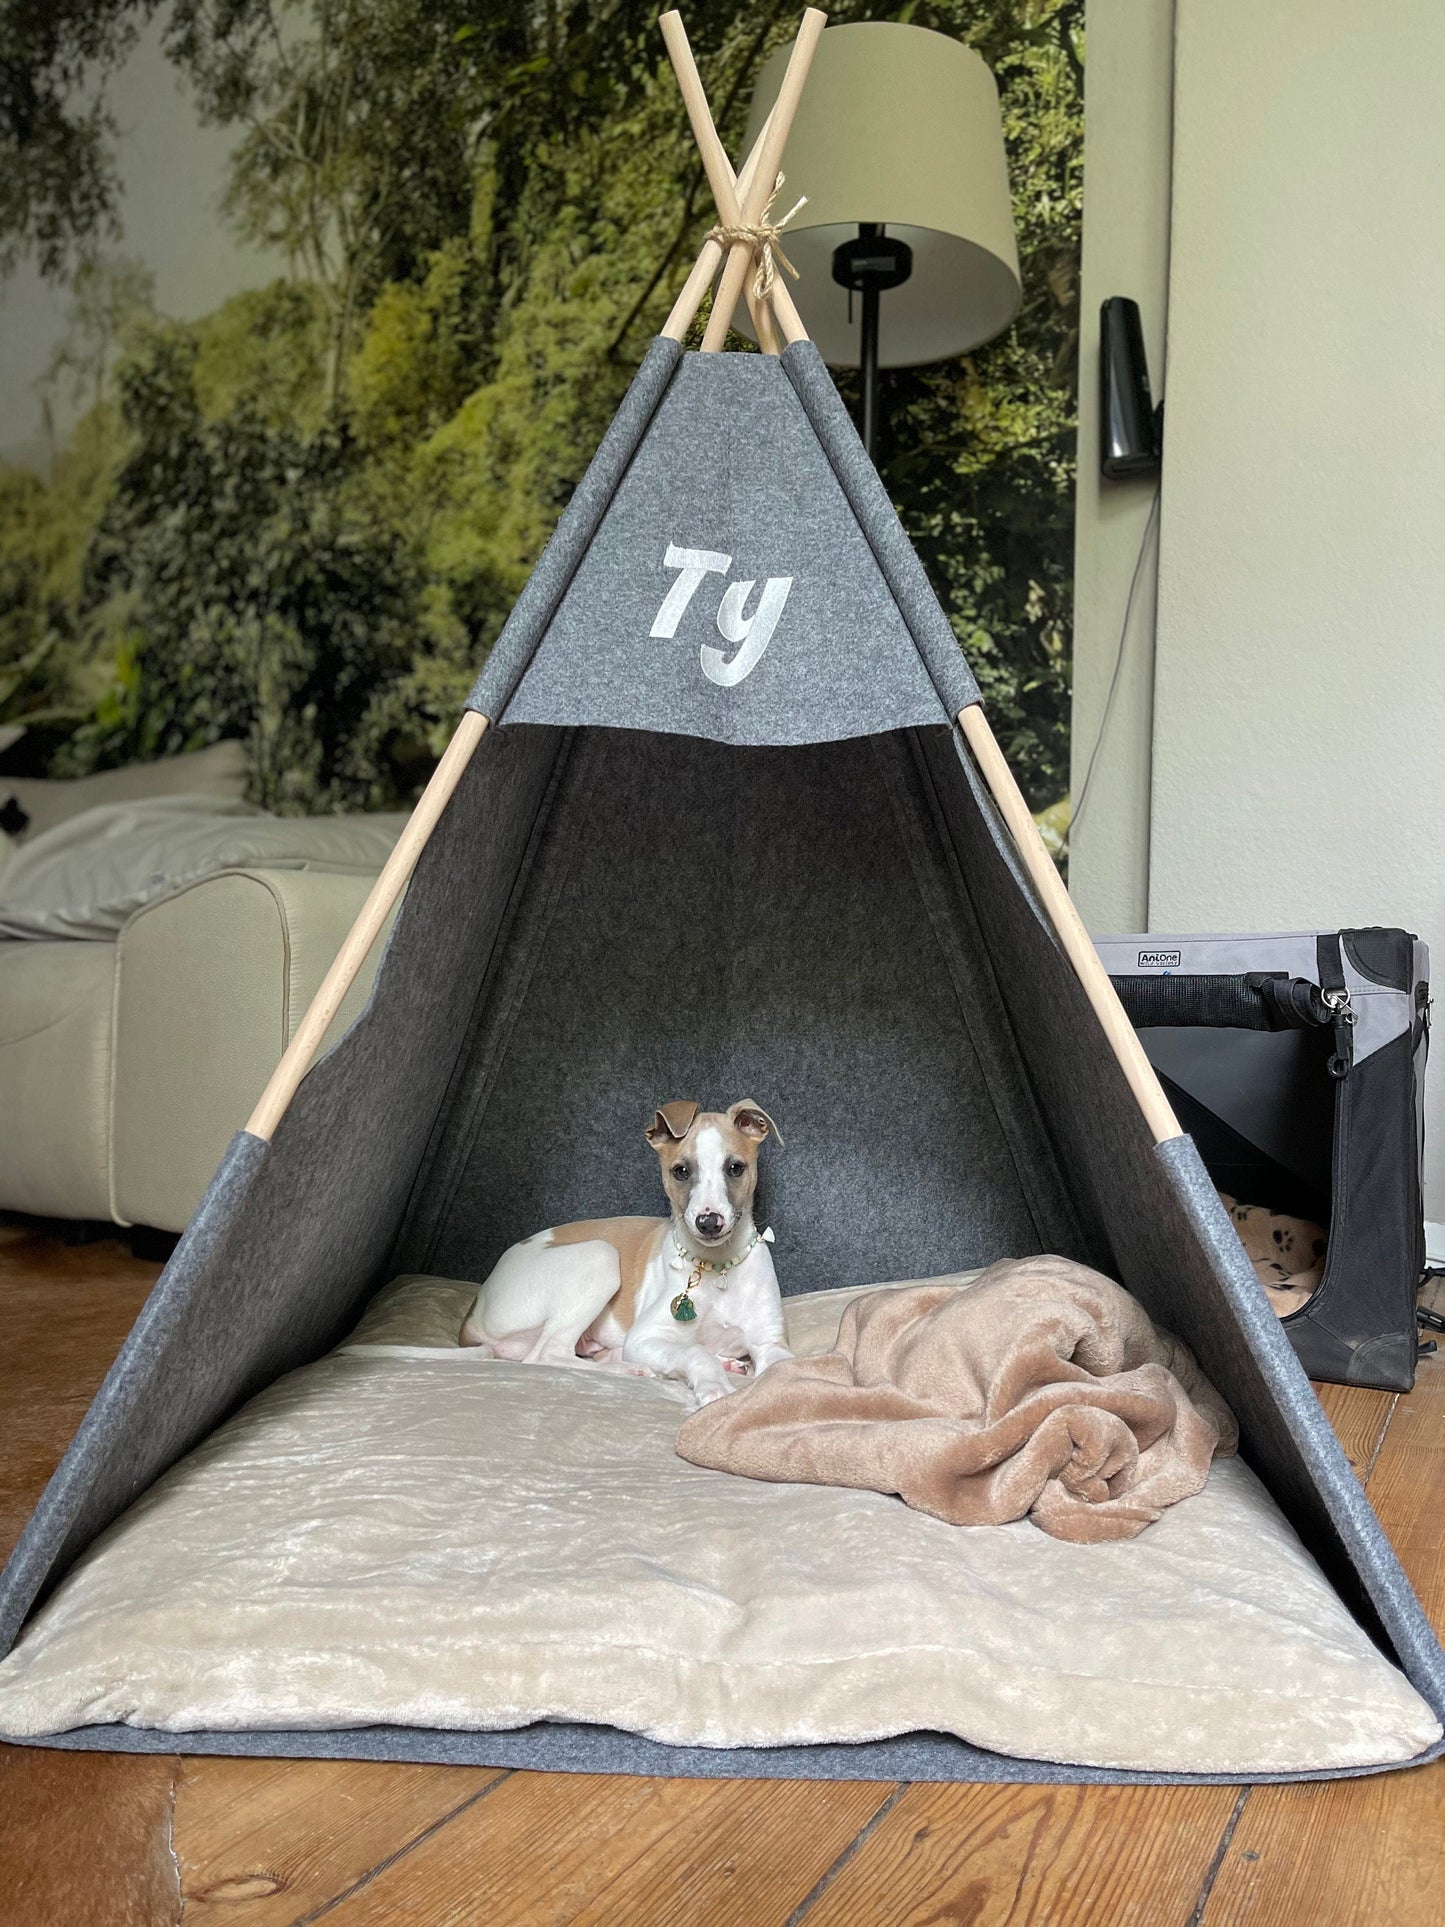 XL Bed Pets 39"Teepee for Big Dogs, large dogs tent, Personalized Teepee Pet husky dogs bed indoor kennel house grey puppy pet bed Name